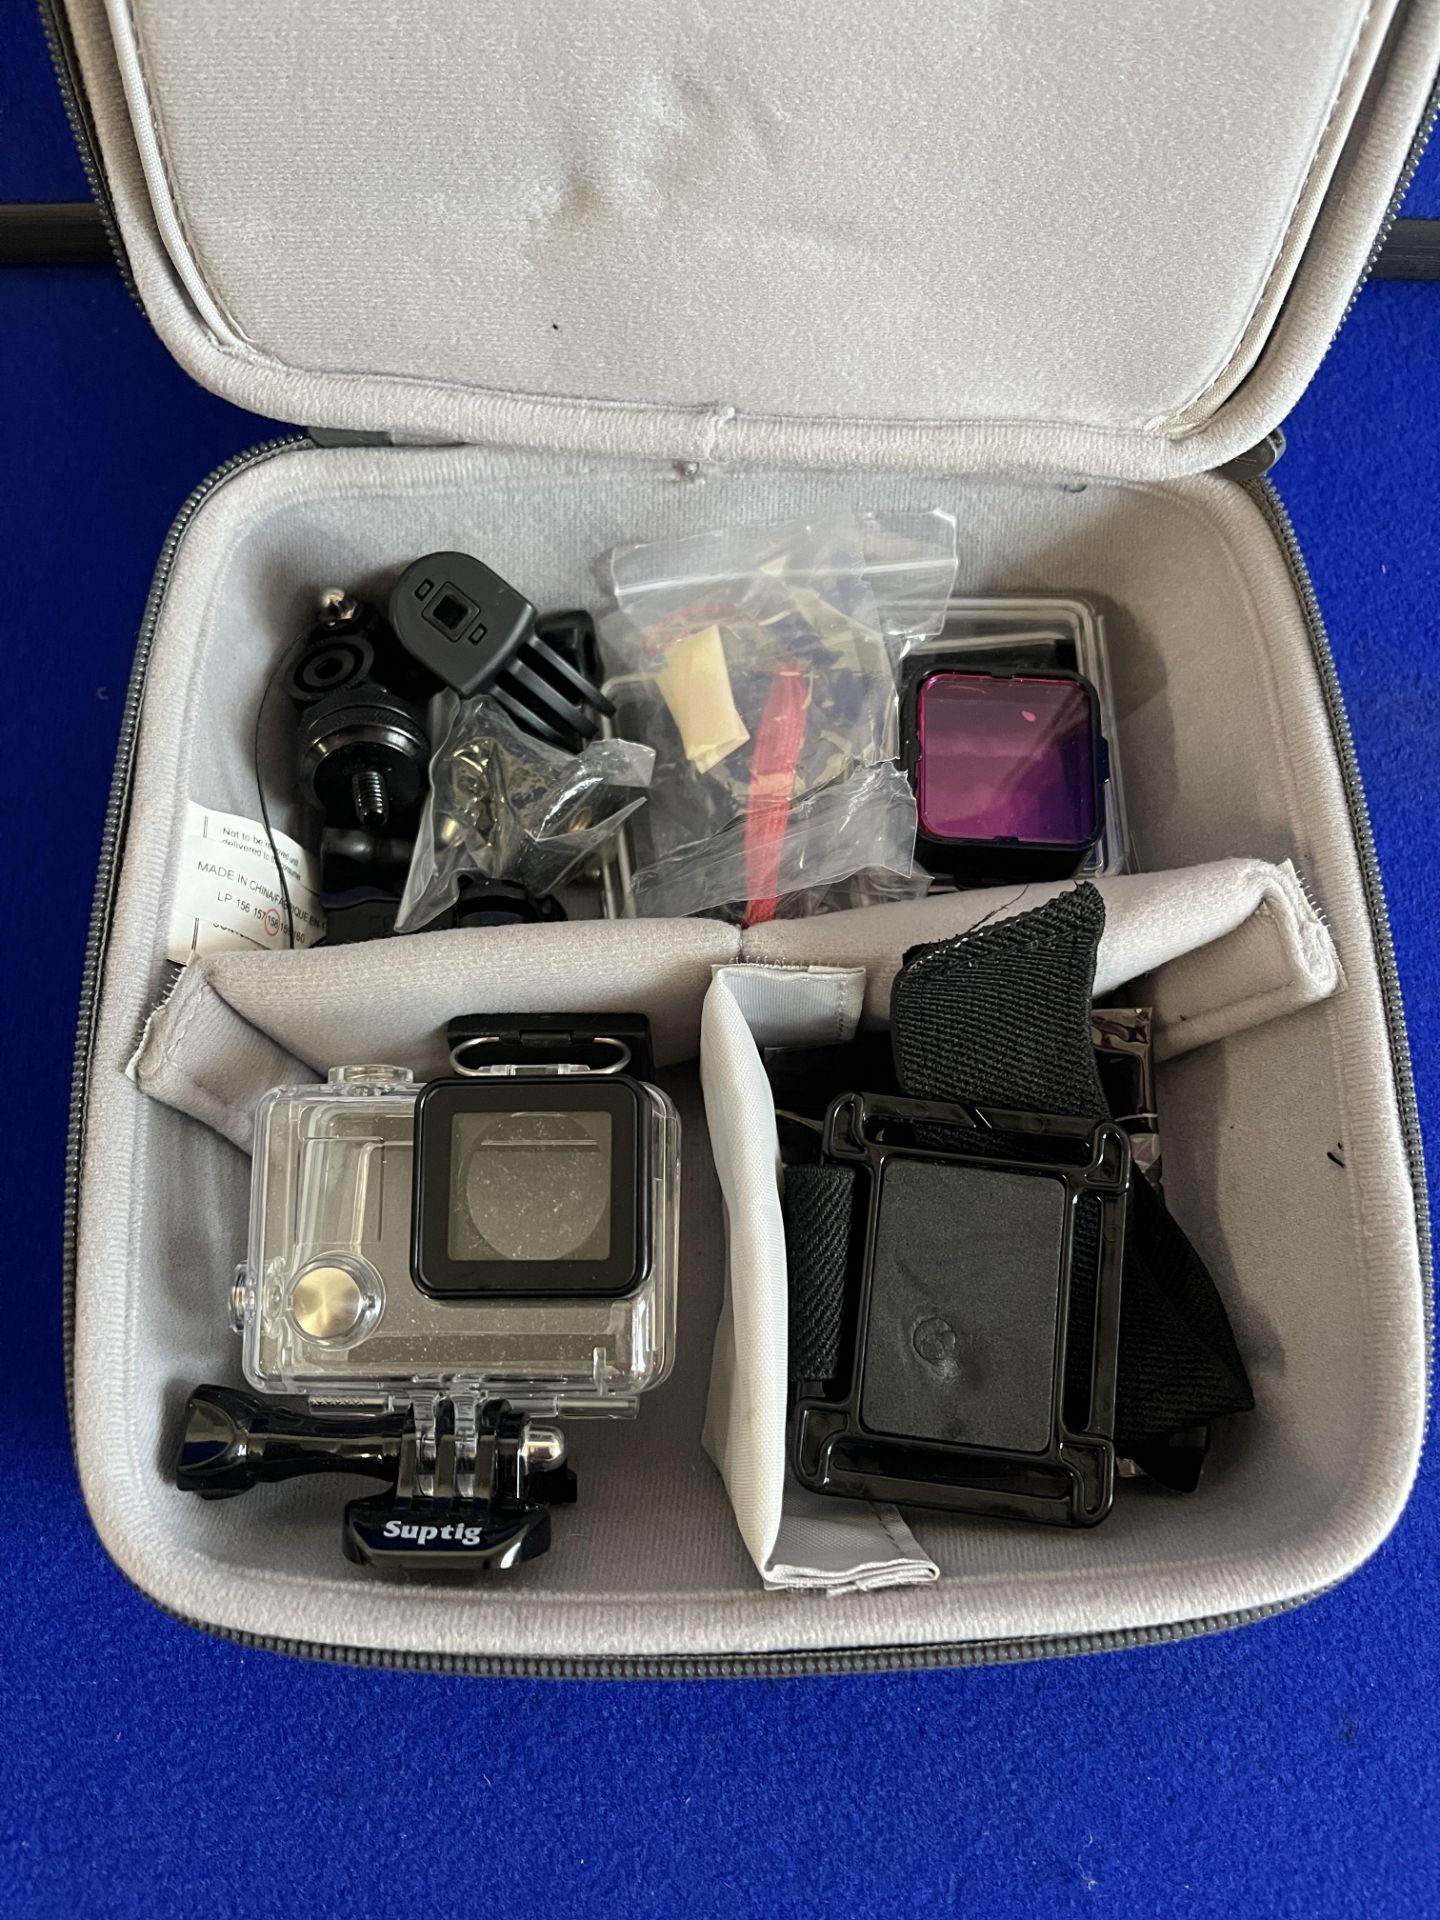 GoPro Hero 4 Camera with accessories - as pictured - Image 2 of 8